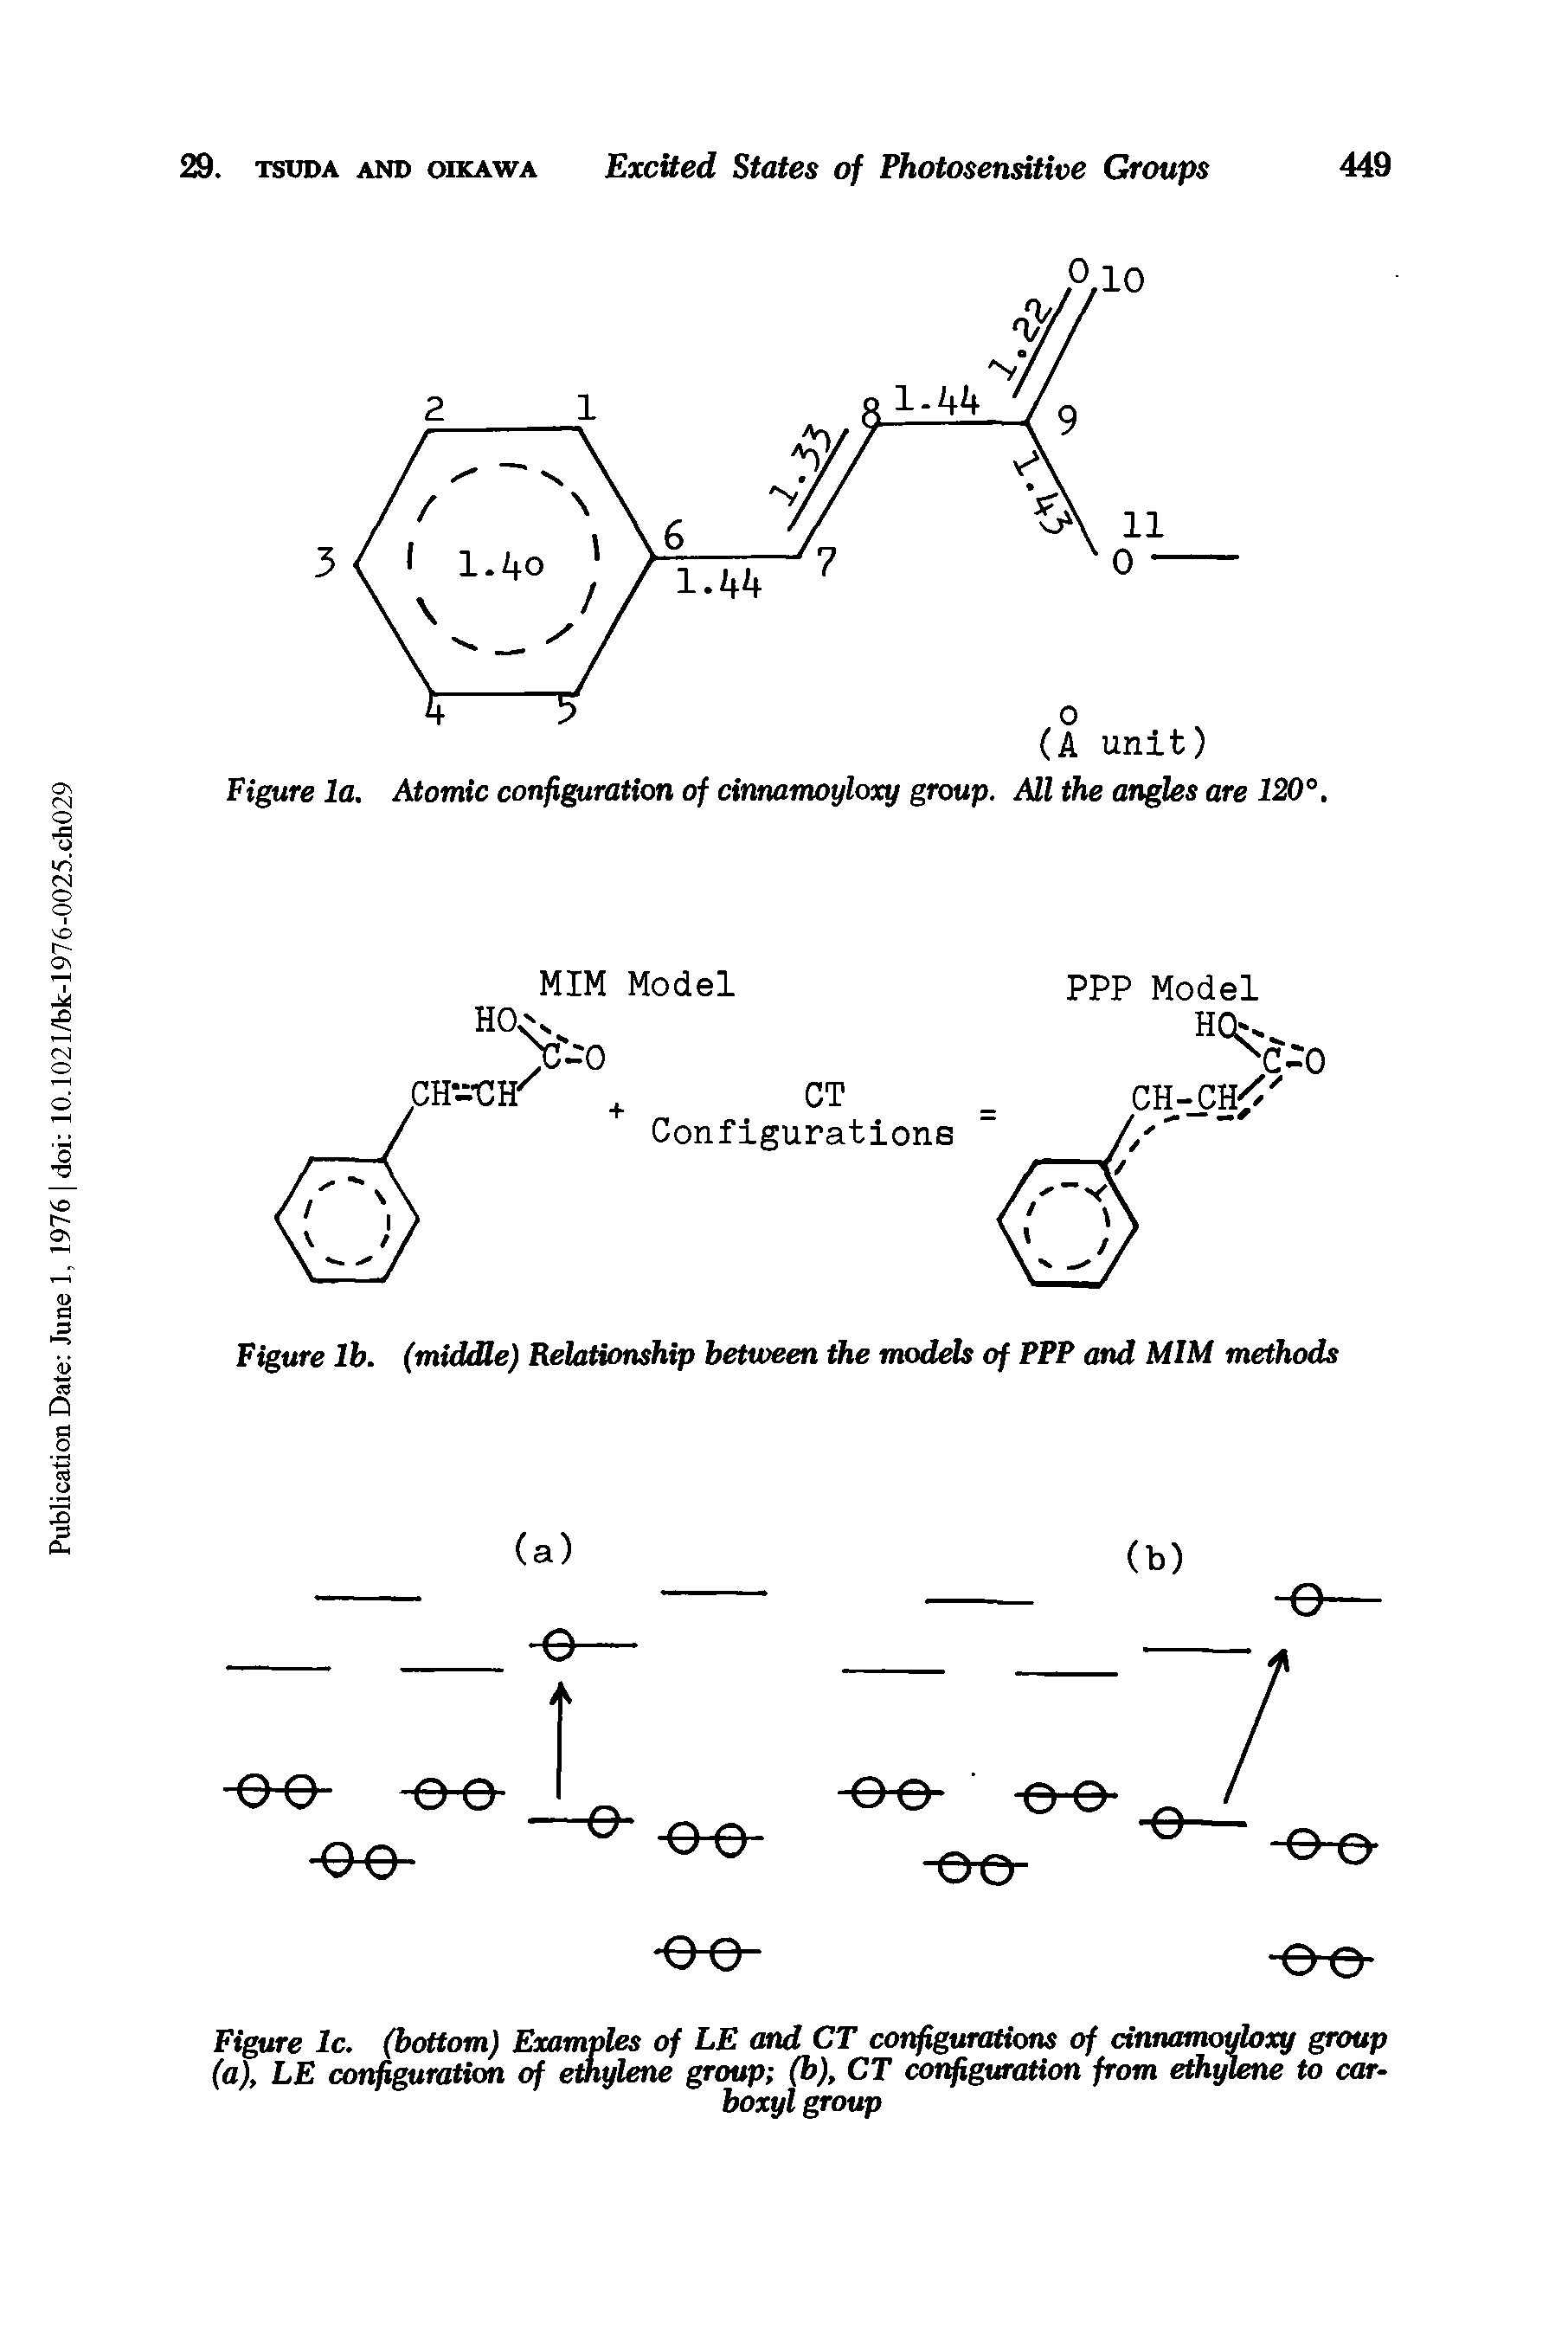 Figure Ic. (bottom) Examples of LE and CT configurations of cinnamoyloxy group (a), LE configuration of emylene group (b), CT configuration from ethylene to carboxyl group...